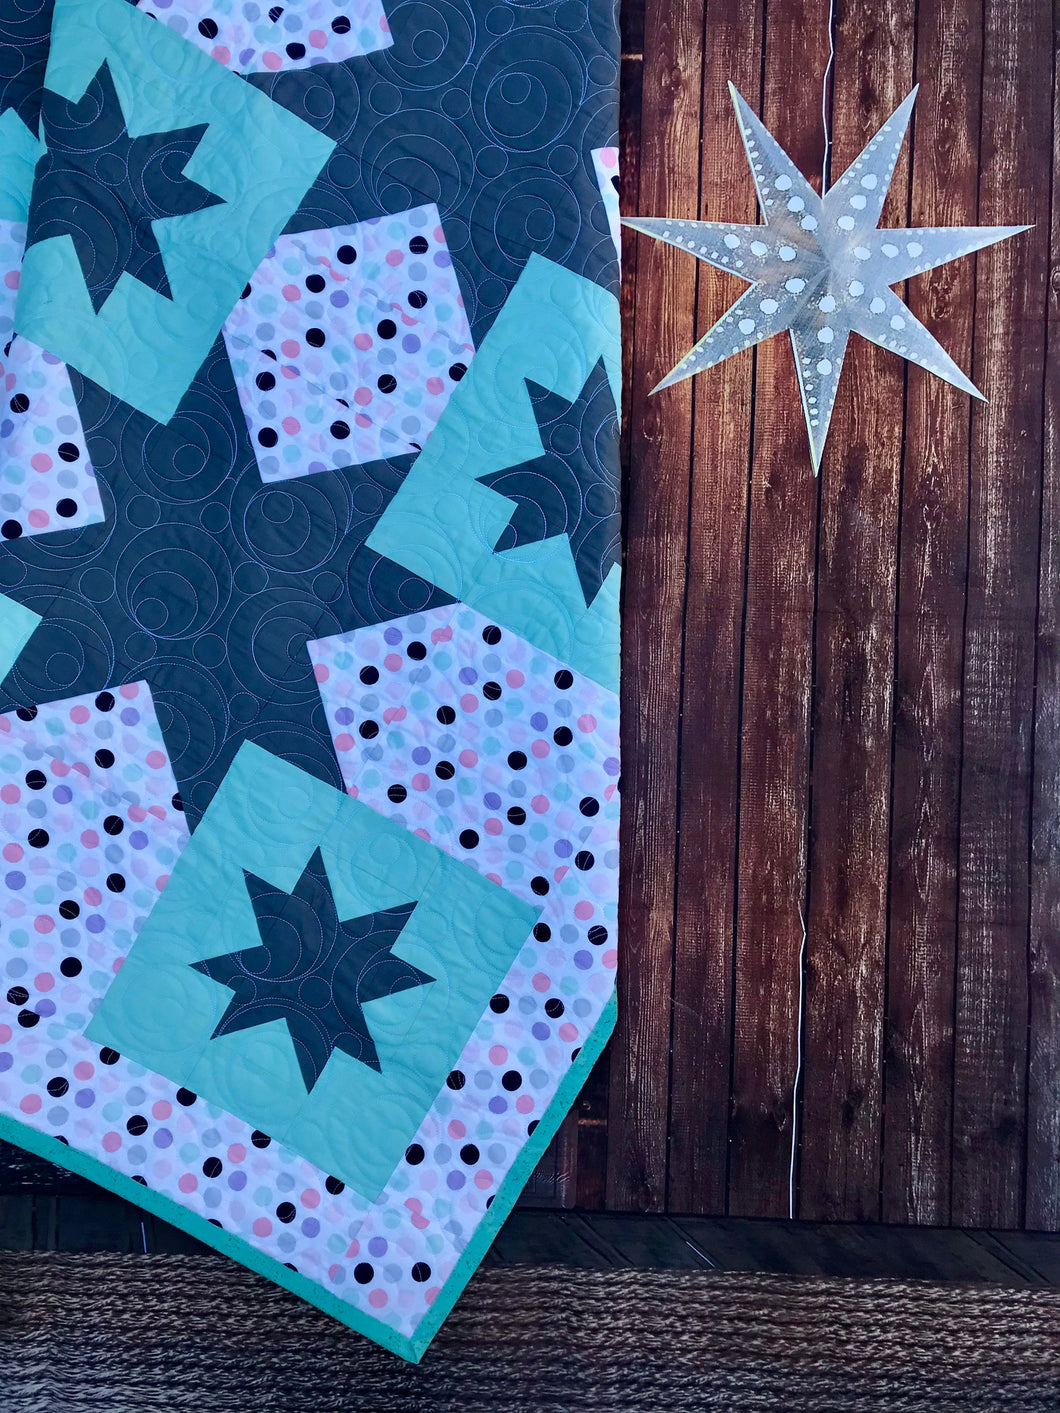 Available now: Mint and grey star quilt, throw size